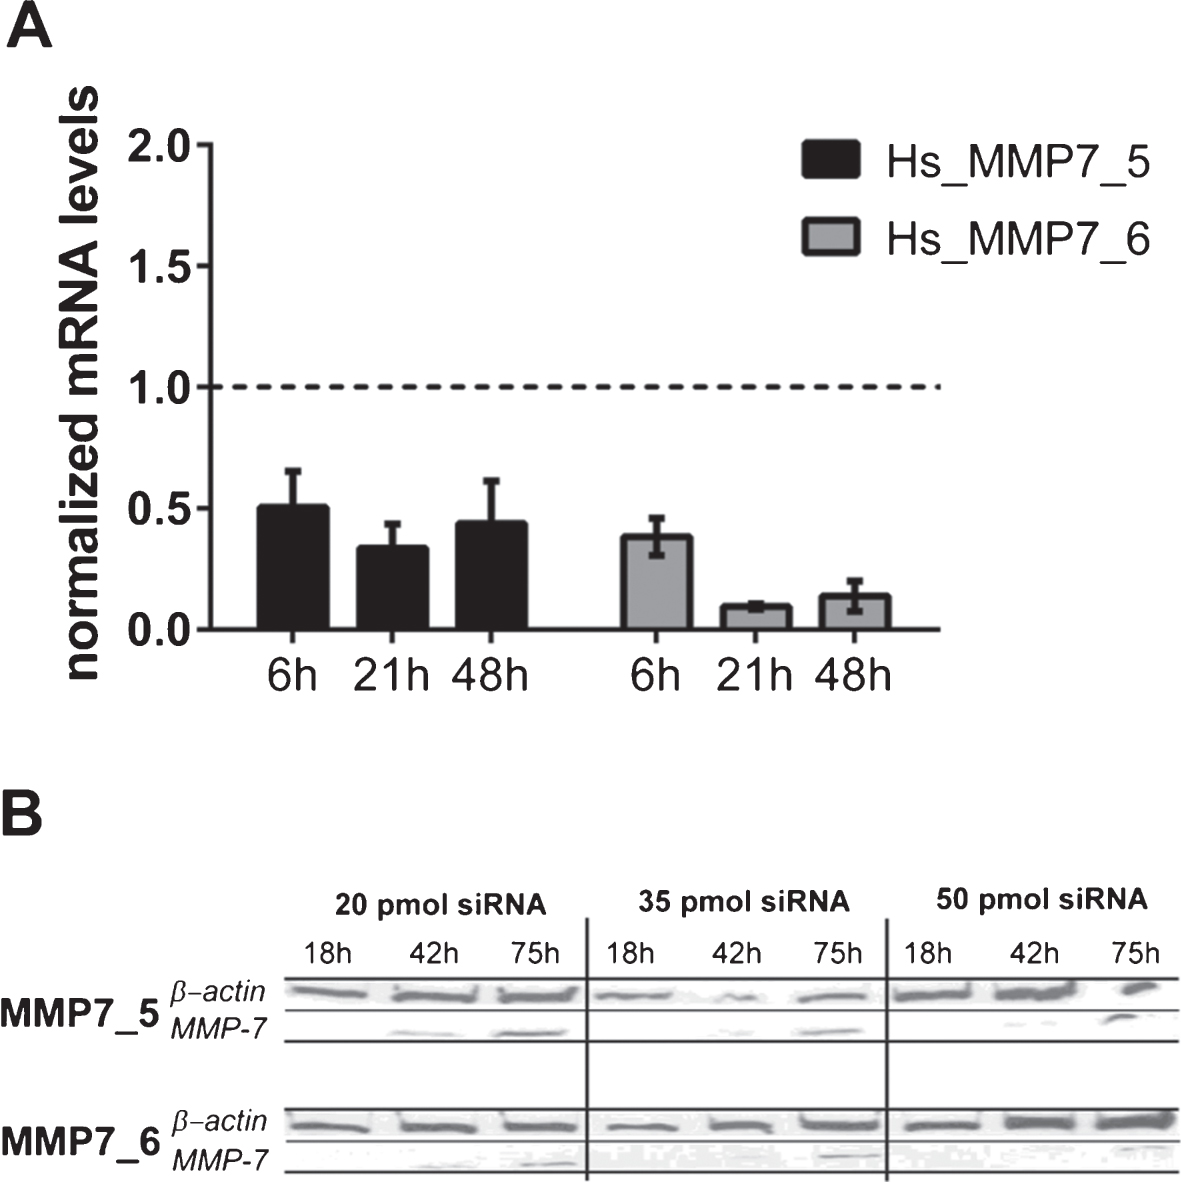 (A) MMP7 gene silencing using small interfering RNAs (siRNAs) in HT1197 cells. Knockdown efficiencies of two distinct siRNAs (MMP7_5, MMP7_6) were determined at indicated post-transfection time points using qRT-PCR. The knockdown efficiency was normalized to cells transfected with scrambled siRNA (siCo = 1, dashed line). (B) Western blot analysis of cells treated with different amounts of siRNAs (20, 35, 50 pmol) were performed 18 h, 42 h and 75 h post-transfection.